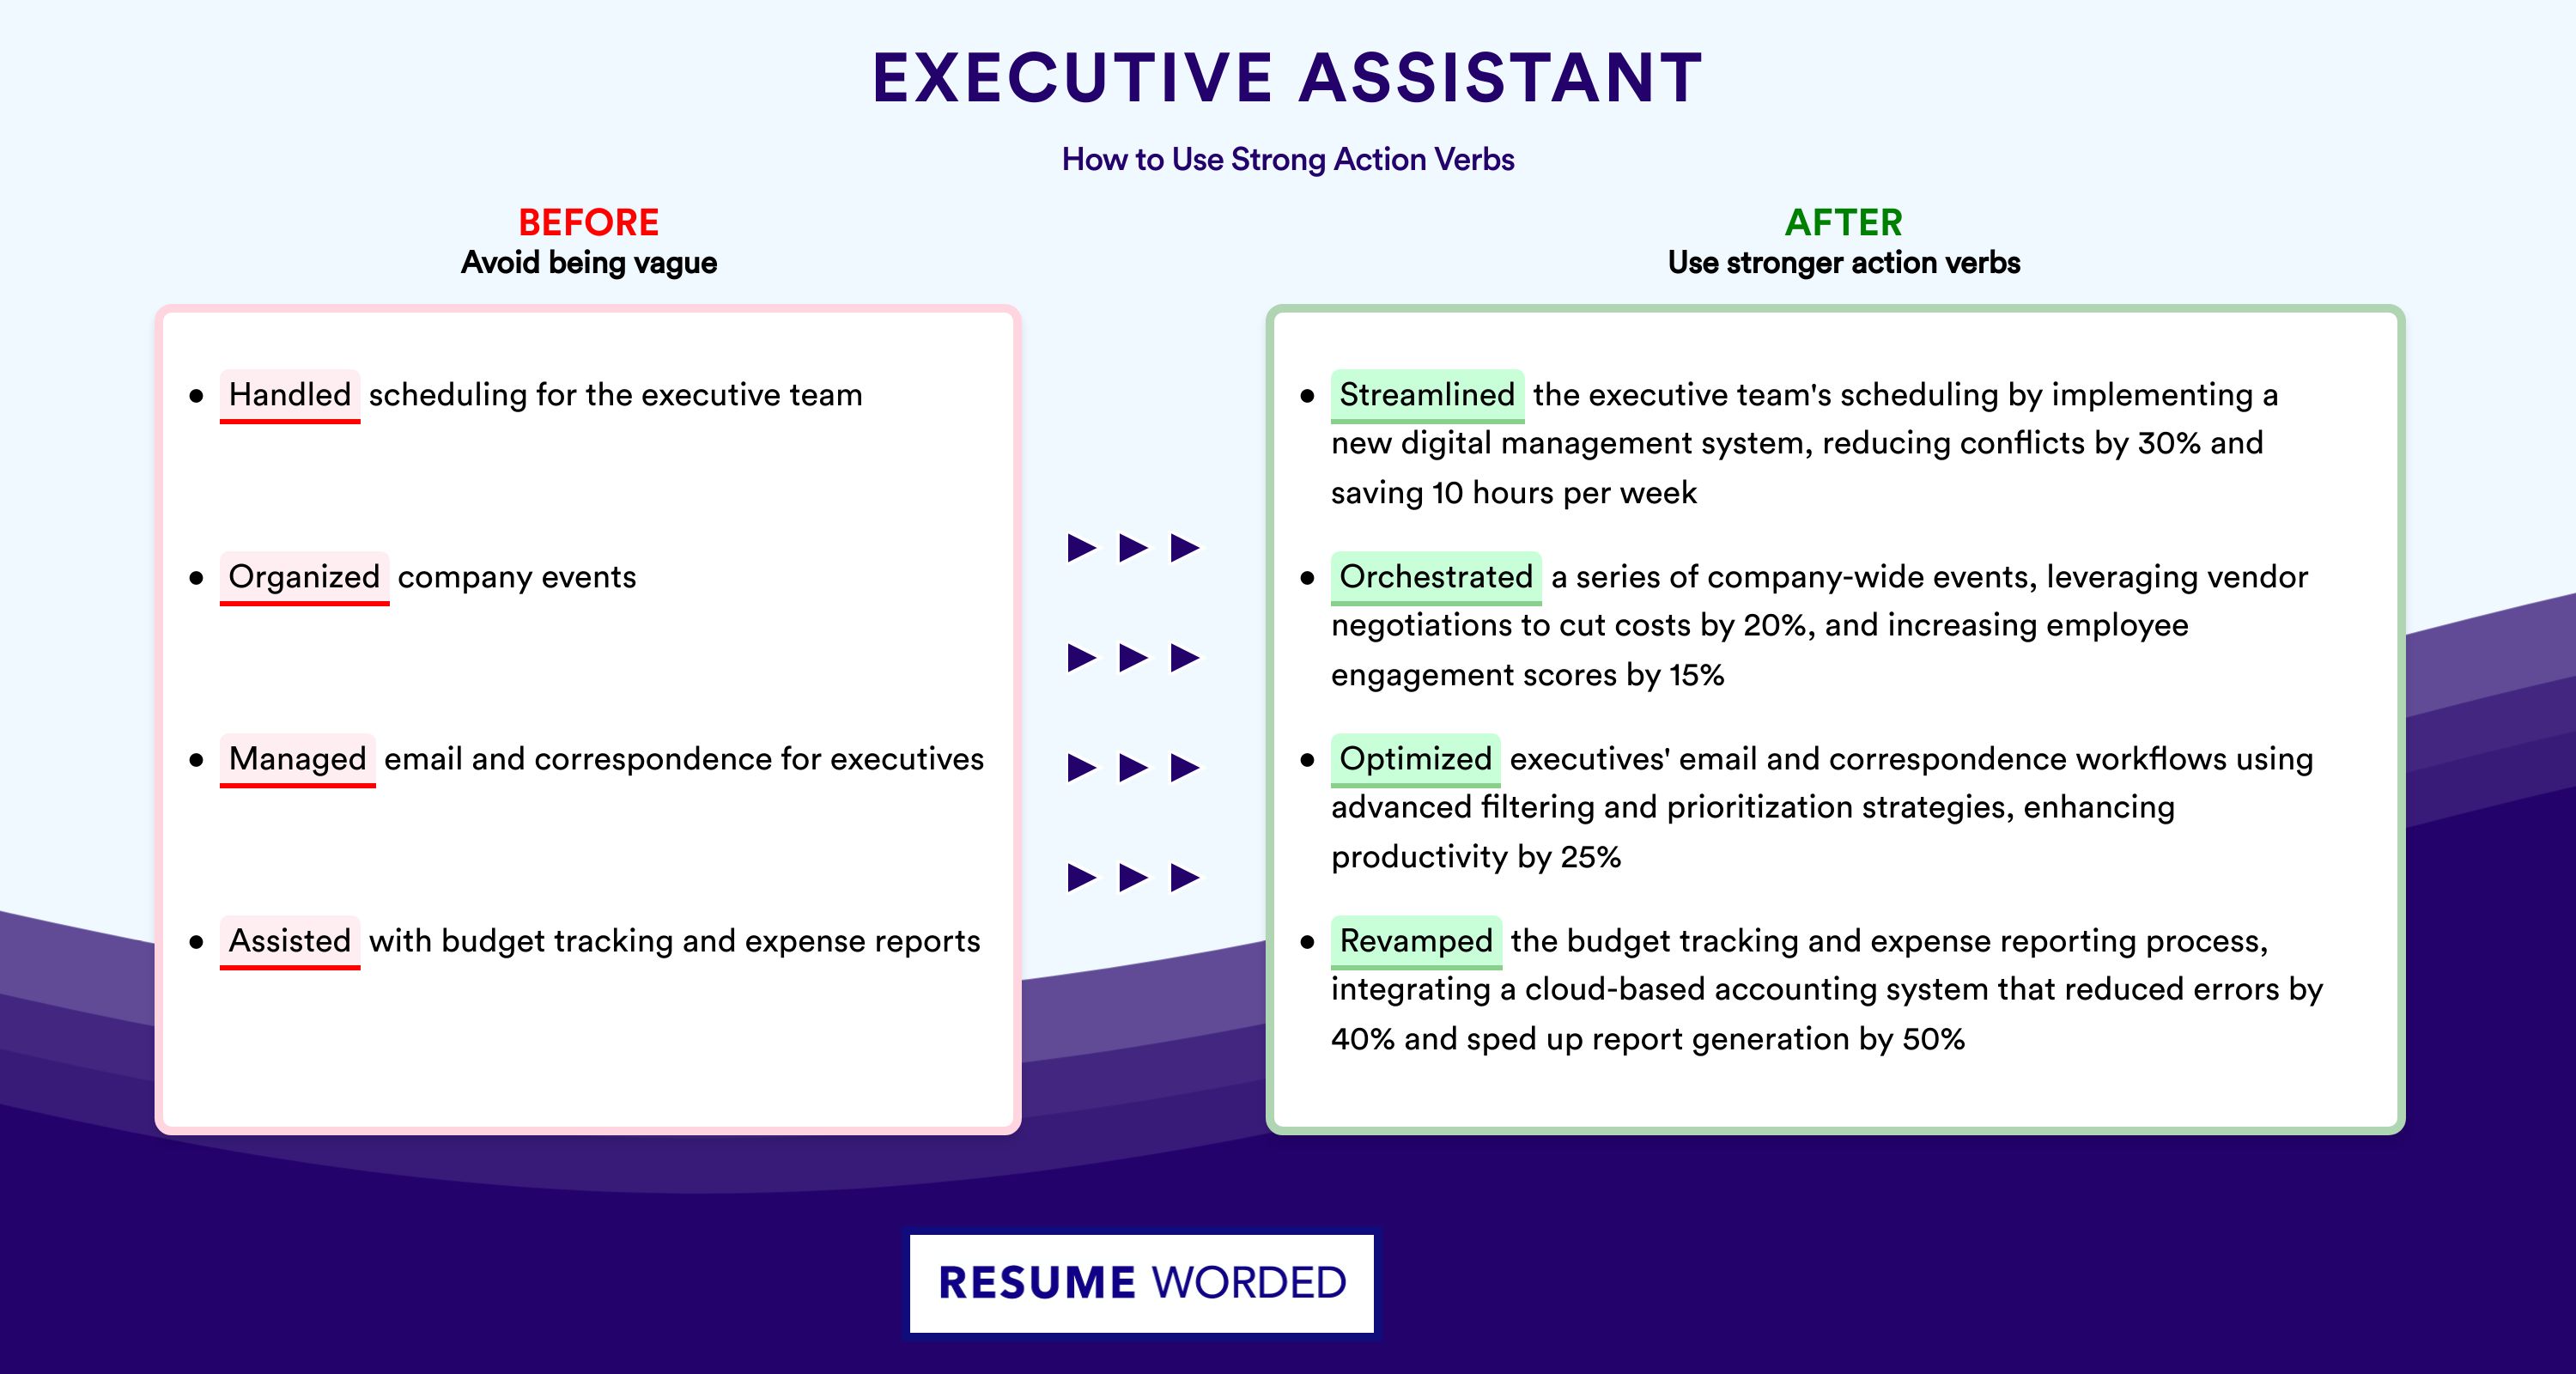 Action Verbs for Executive Assistant